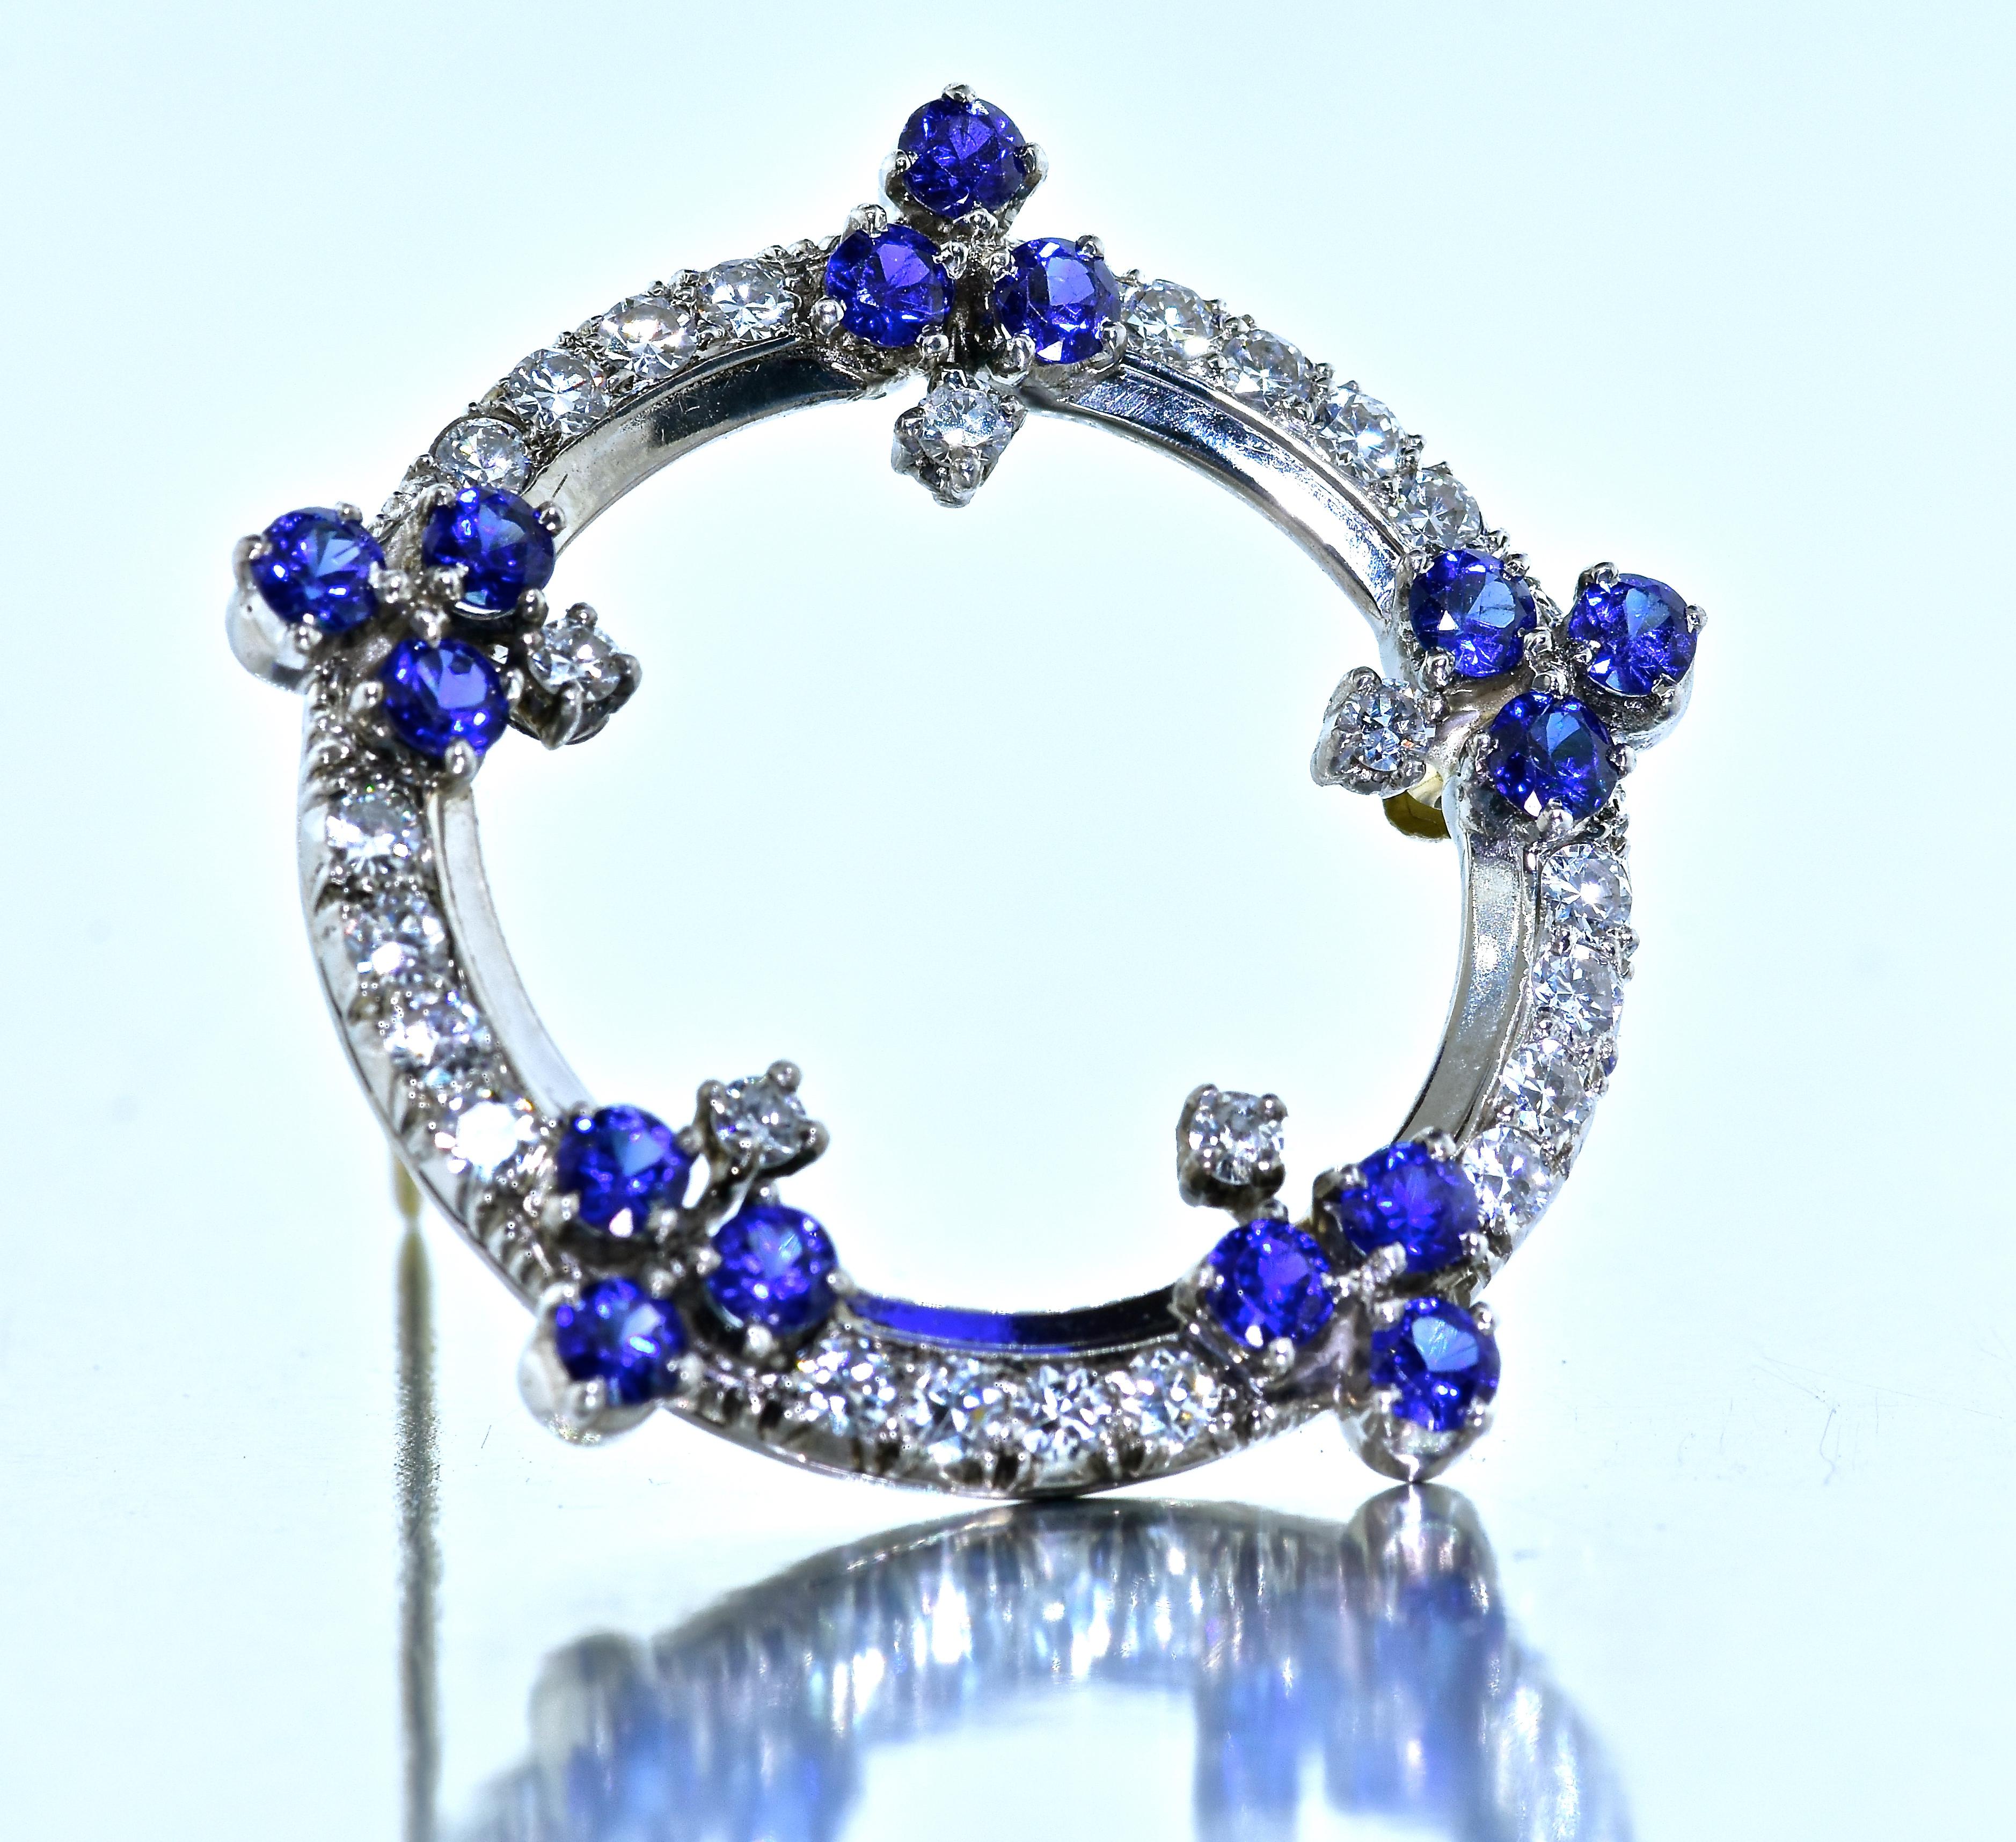 Platinum, diamond and sapphire brooch with fine white brilliant cut diamonds and 15 natural sapphires displaying vivid blue color and weighing an estimated 1.10 cts.  The diamonds are all well matched, with fine symmetry, color and clarity.  The 25